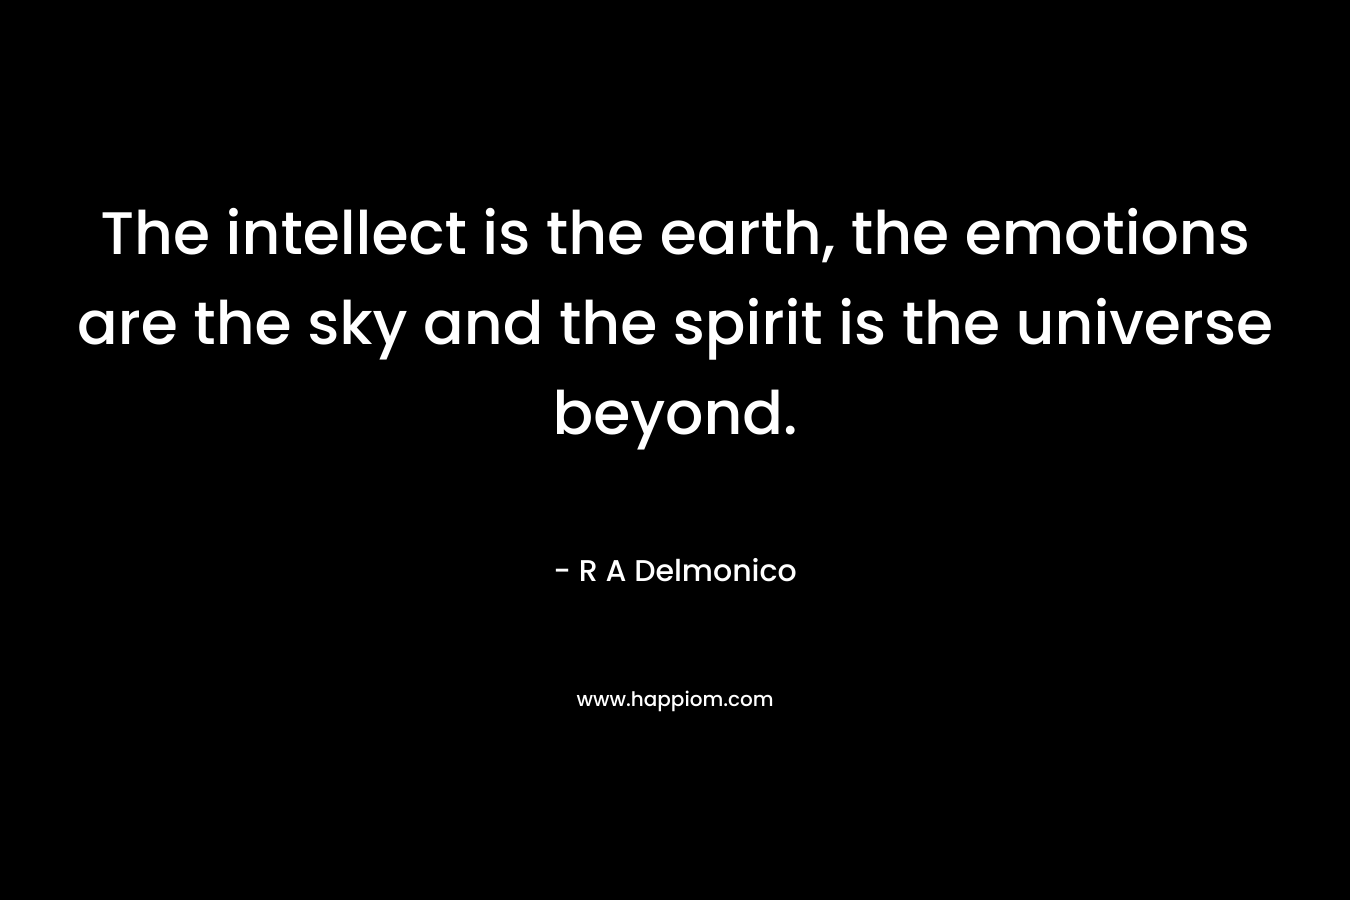 The intellect is the earth, the emotions are the sky and the spirit is the universe beyond.